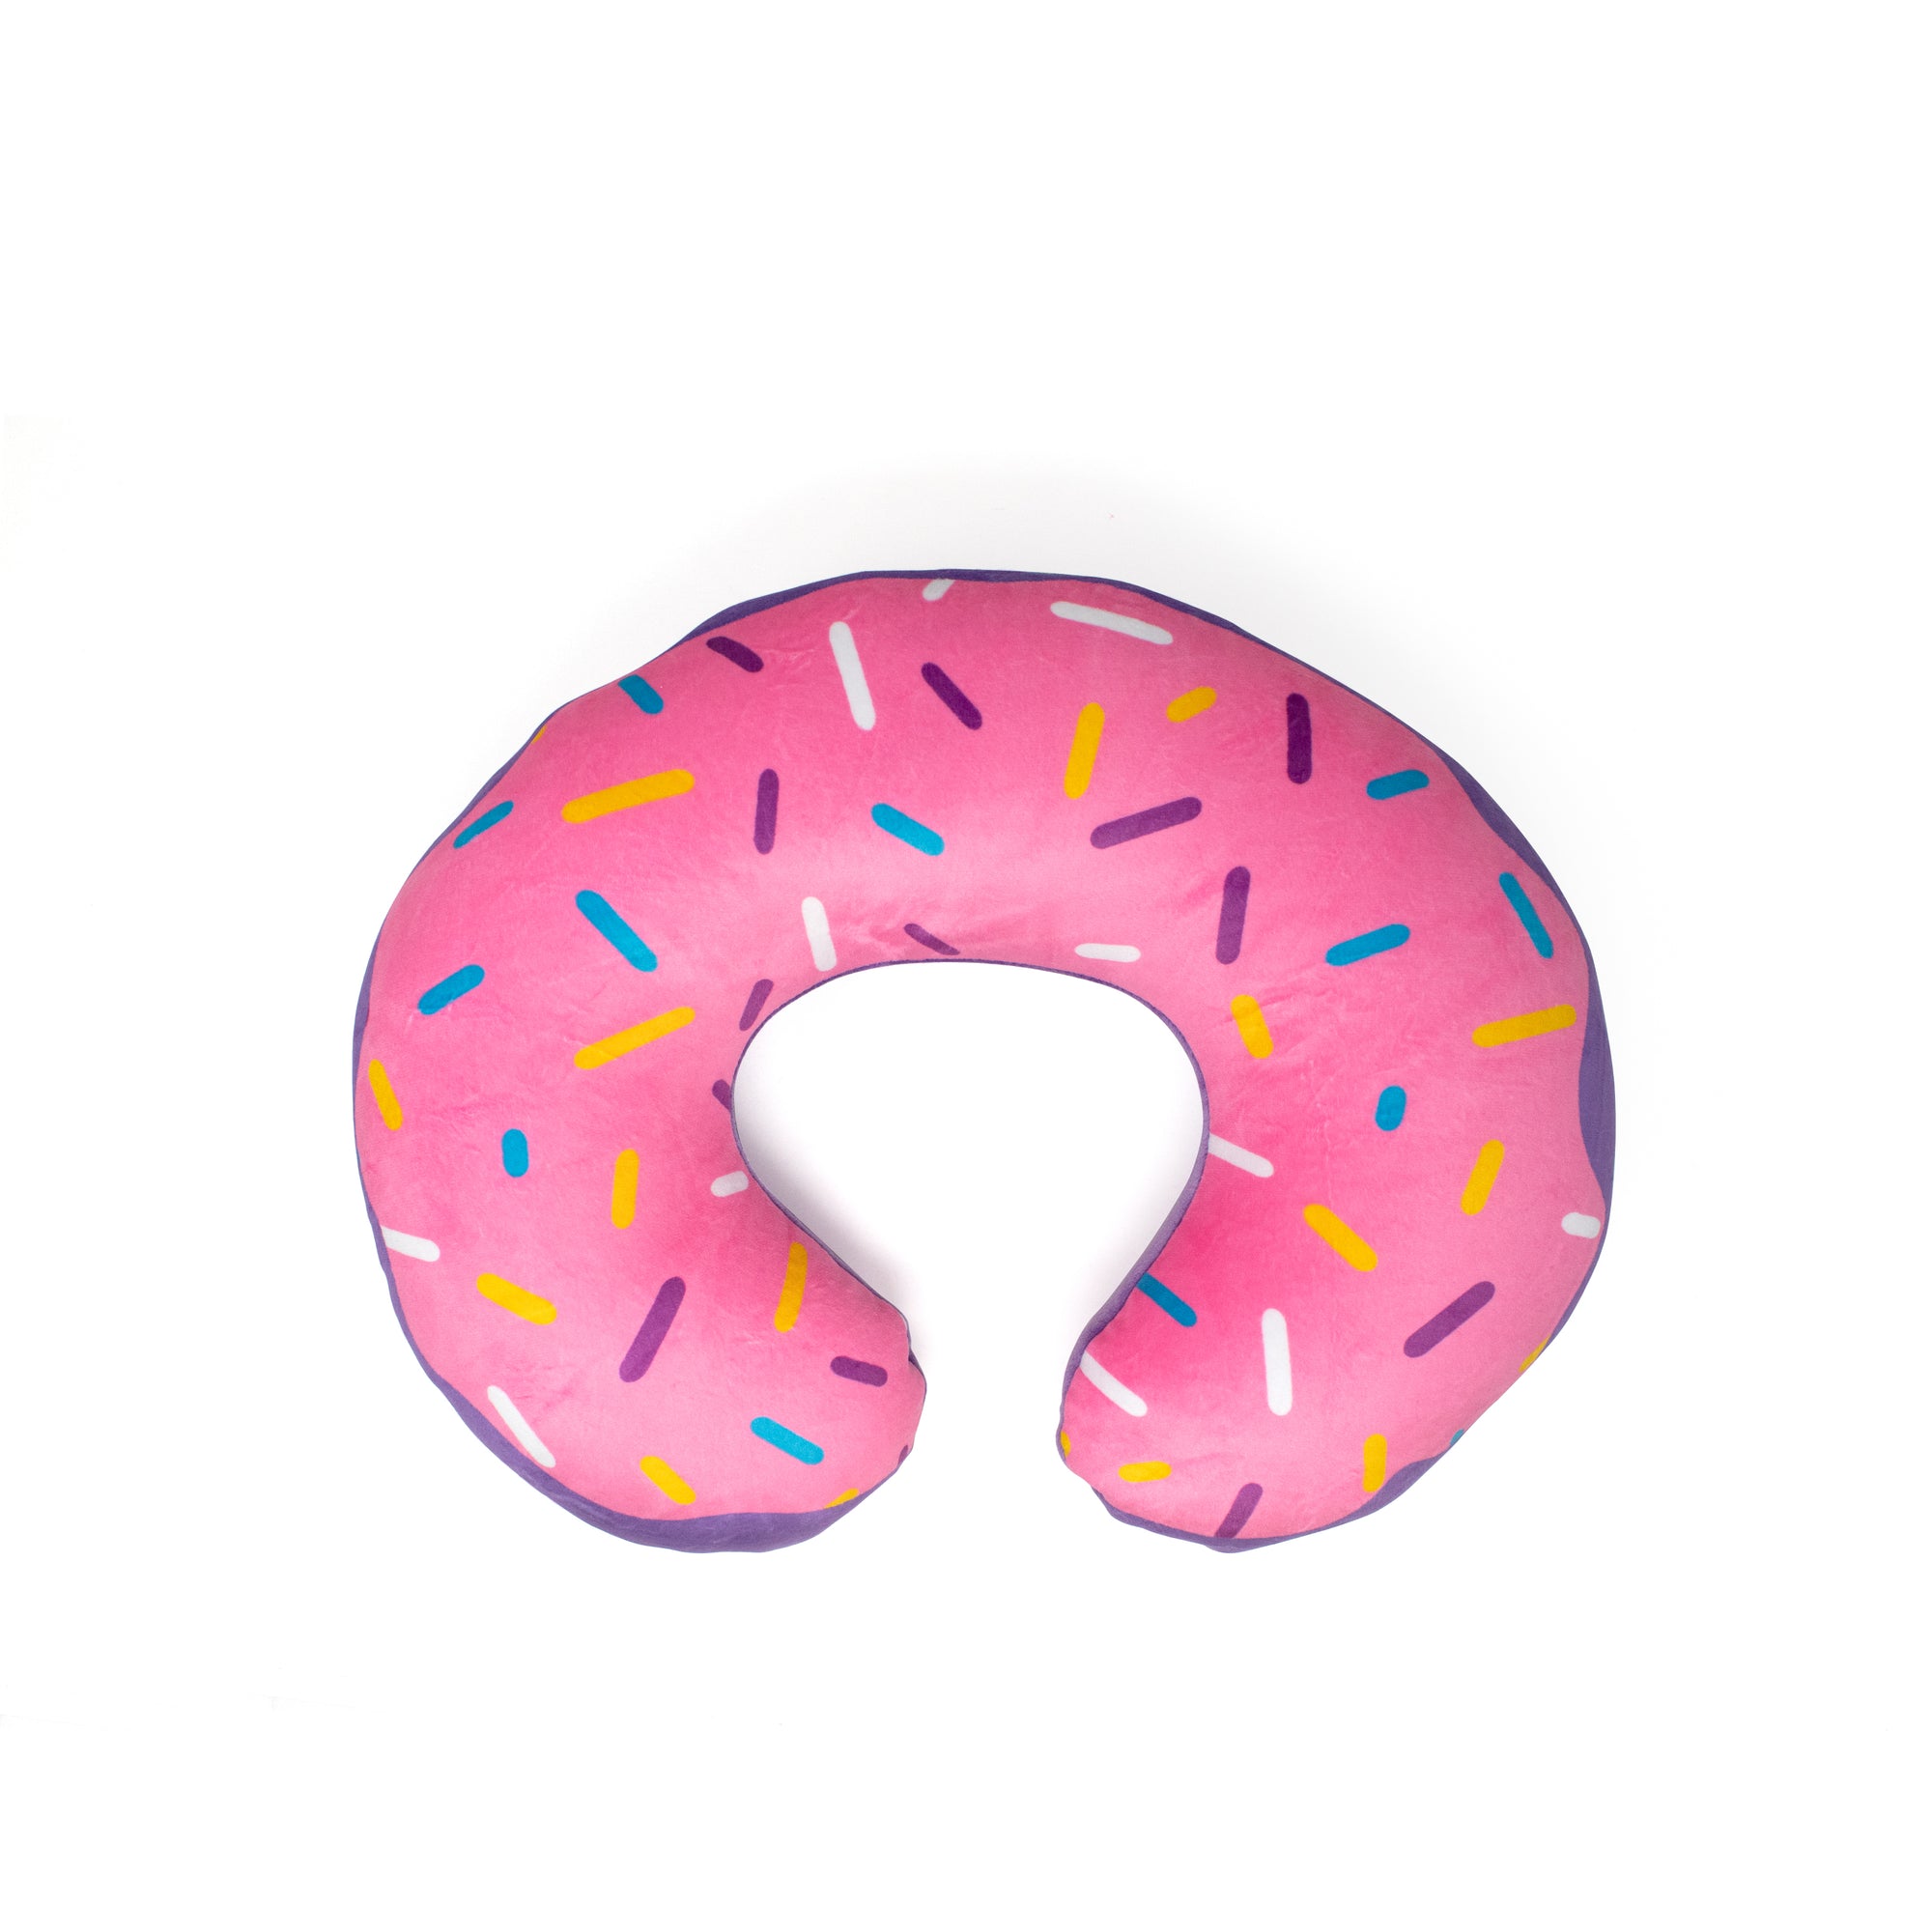 Freckles the Doughnut Cat 2-In-1 Travel Pillow